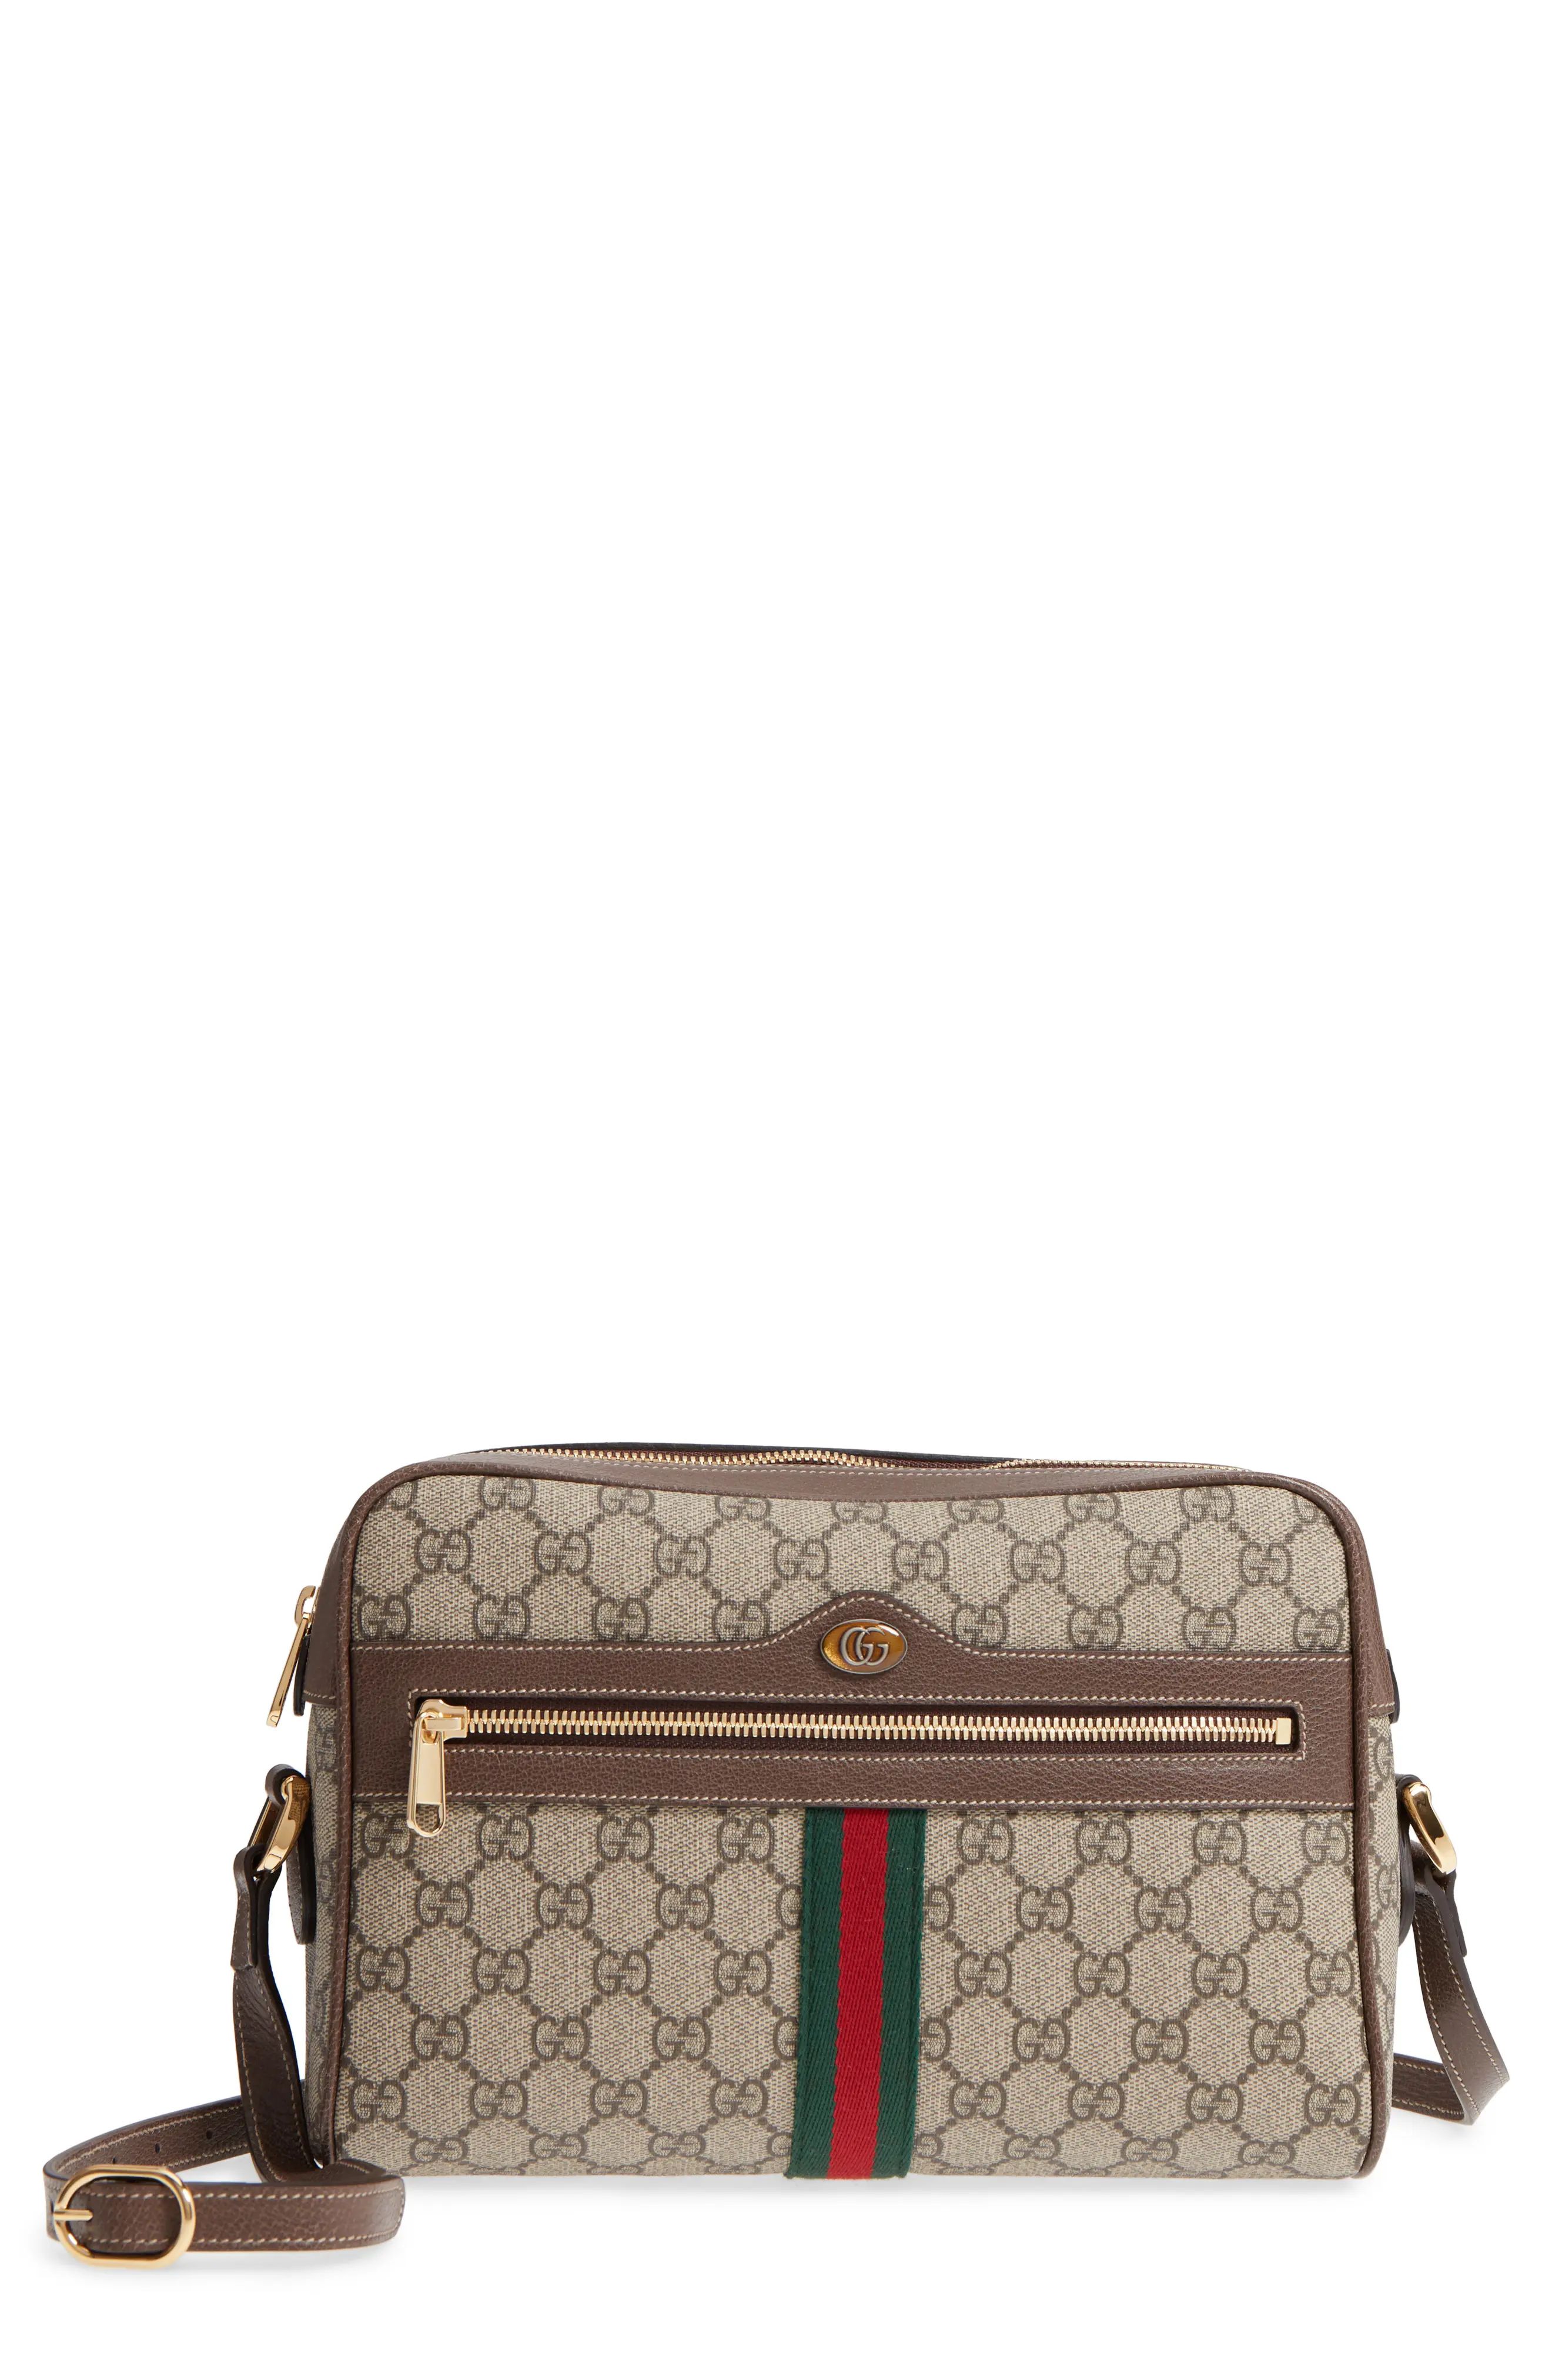 Gucci Ophidia GG Supreme Canvas Crossbody Bag | Nordstrom